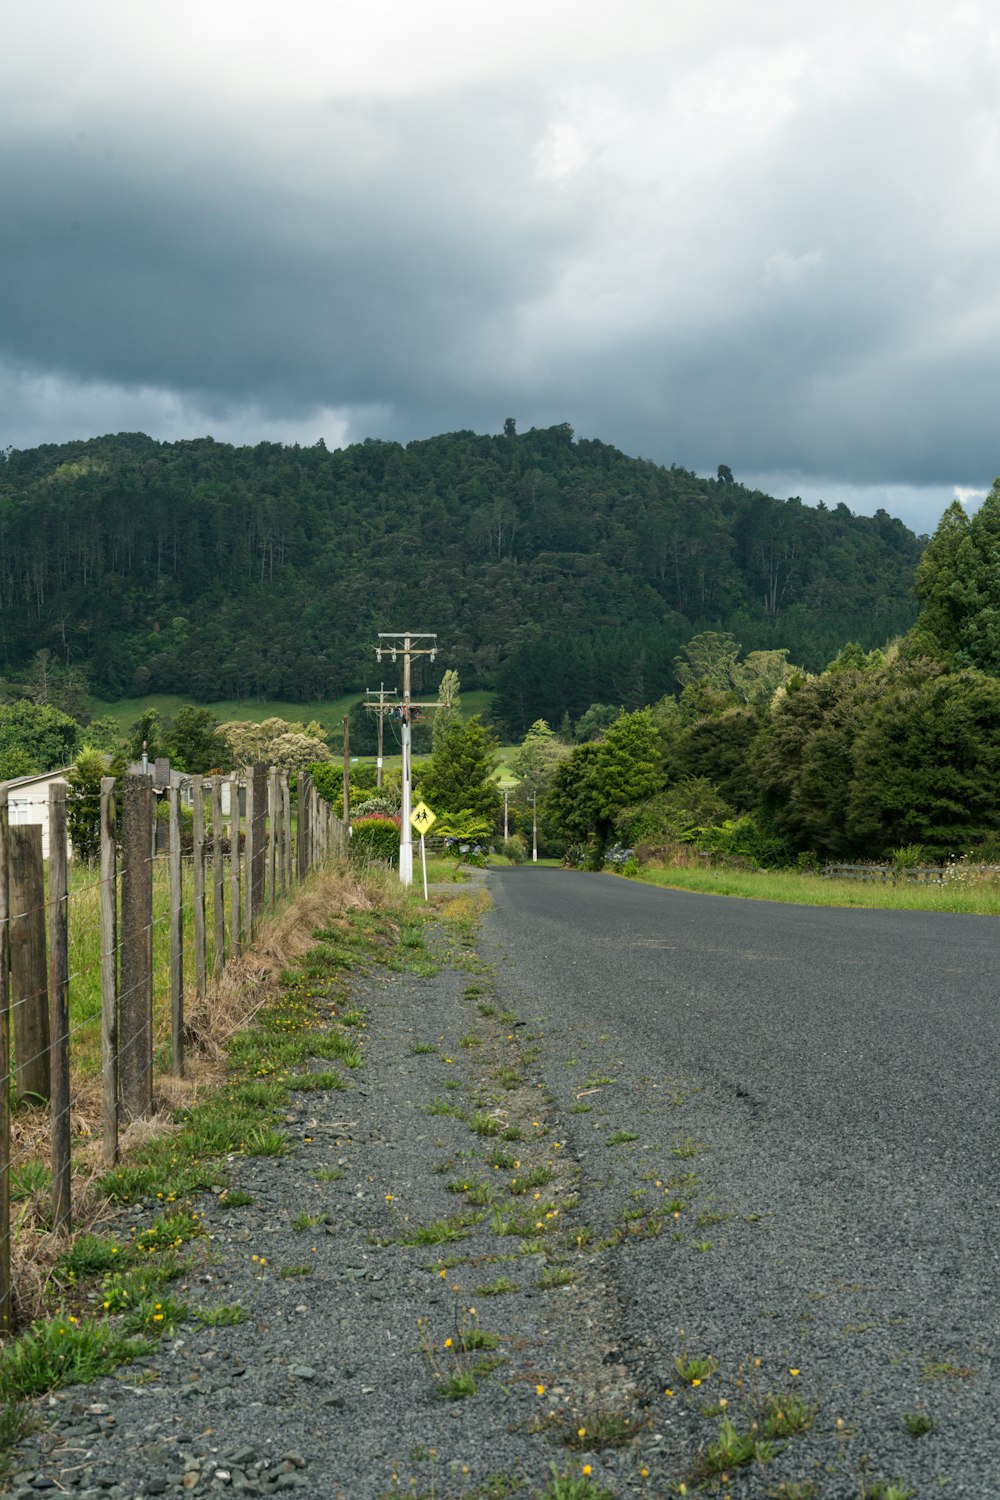 a rural road with a fence and a telephone pole